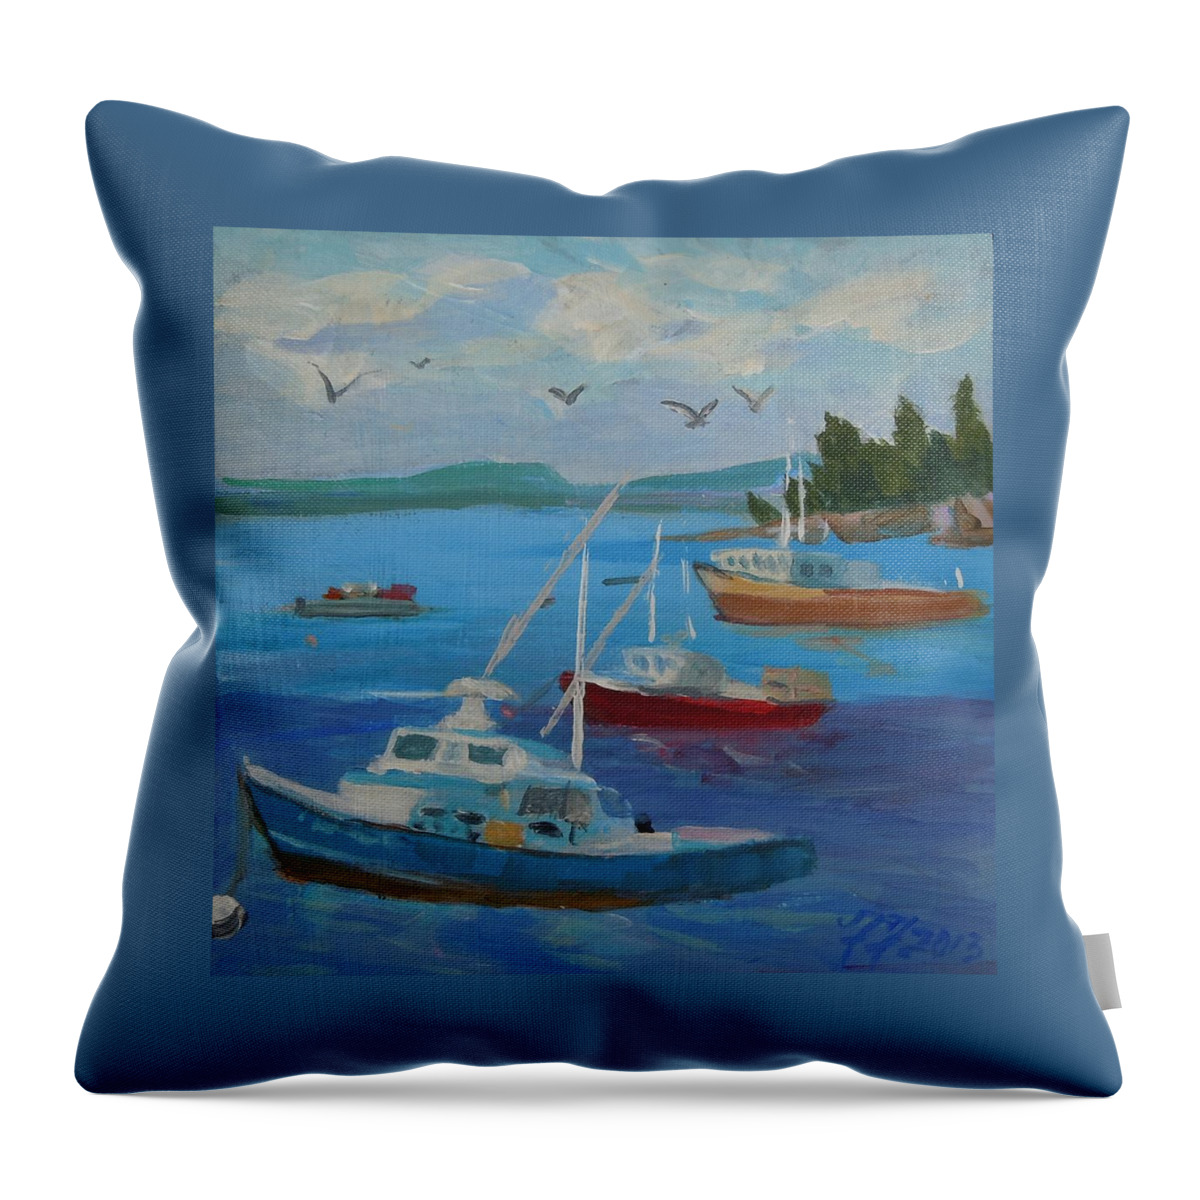 Seascape Throw Pillow featuring the painting Bar Harbor Lobster Boats by Francine Frank